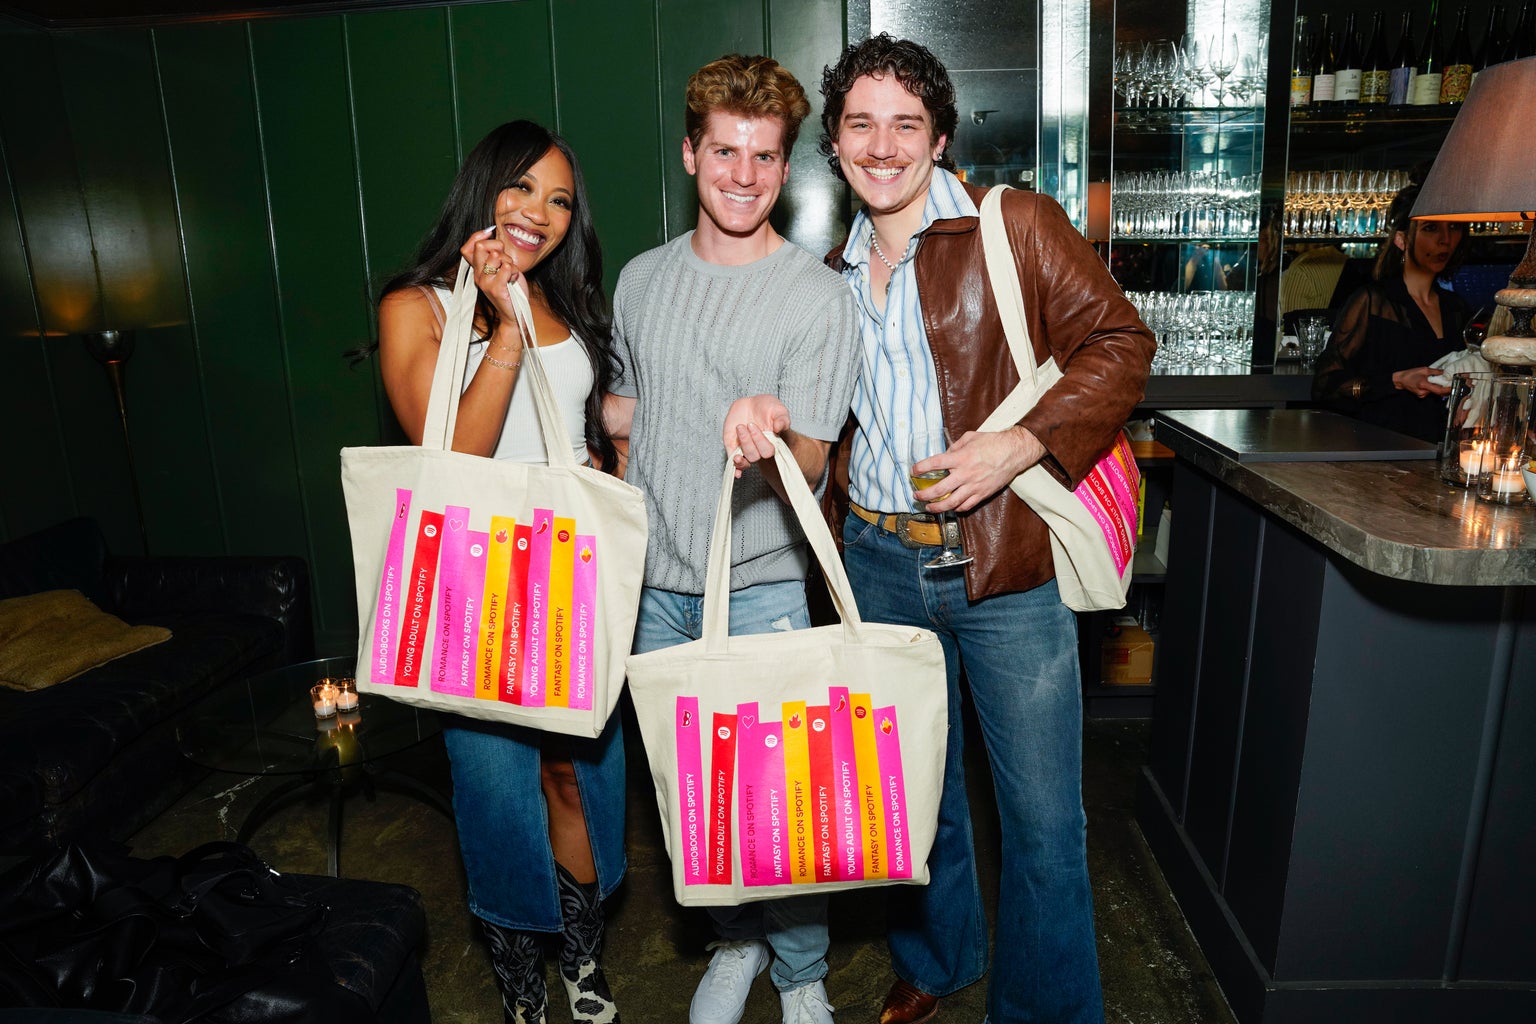 Event guests with Spotify spicy audiobooks goodie bags